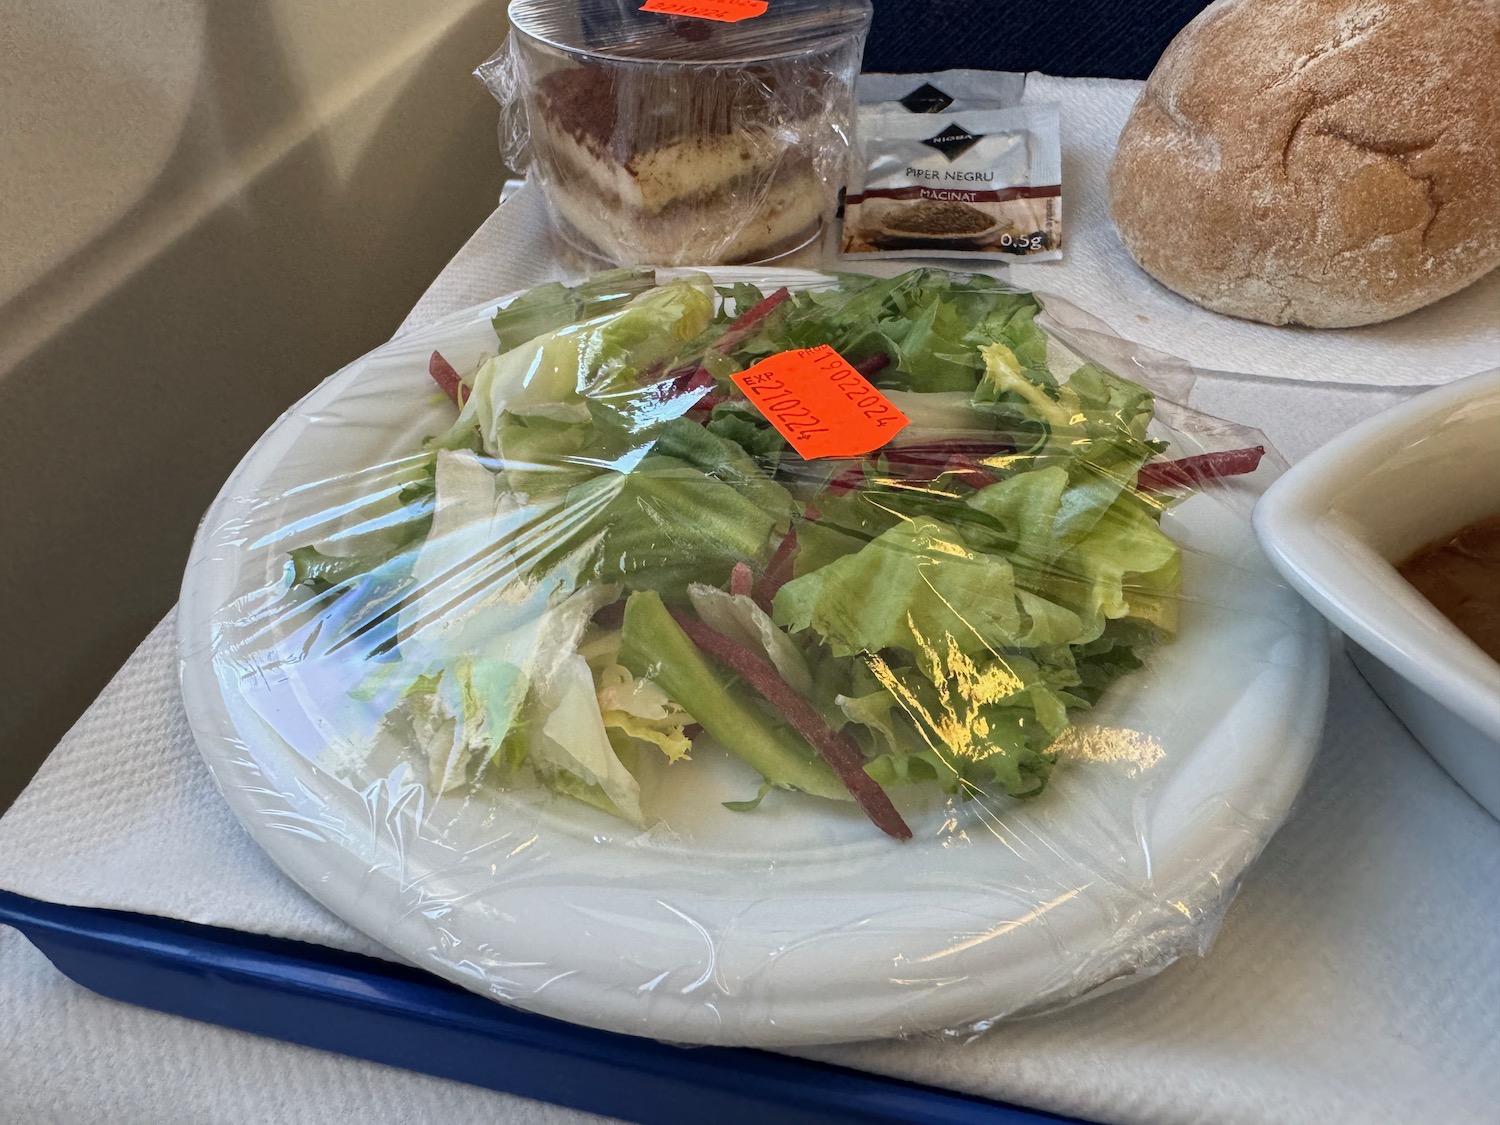 a plate of salad and bread on a tray